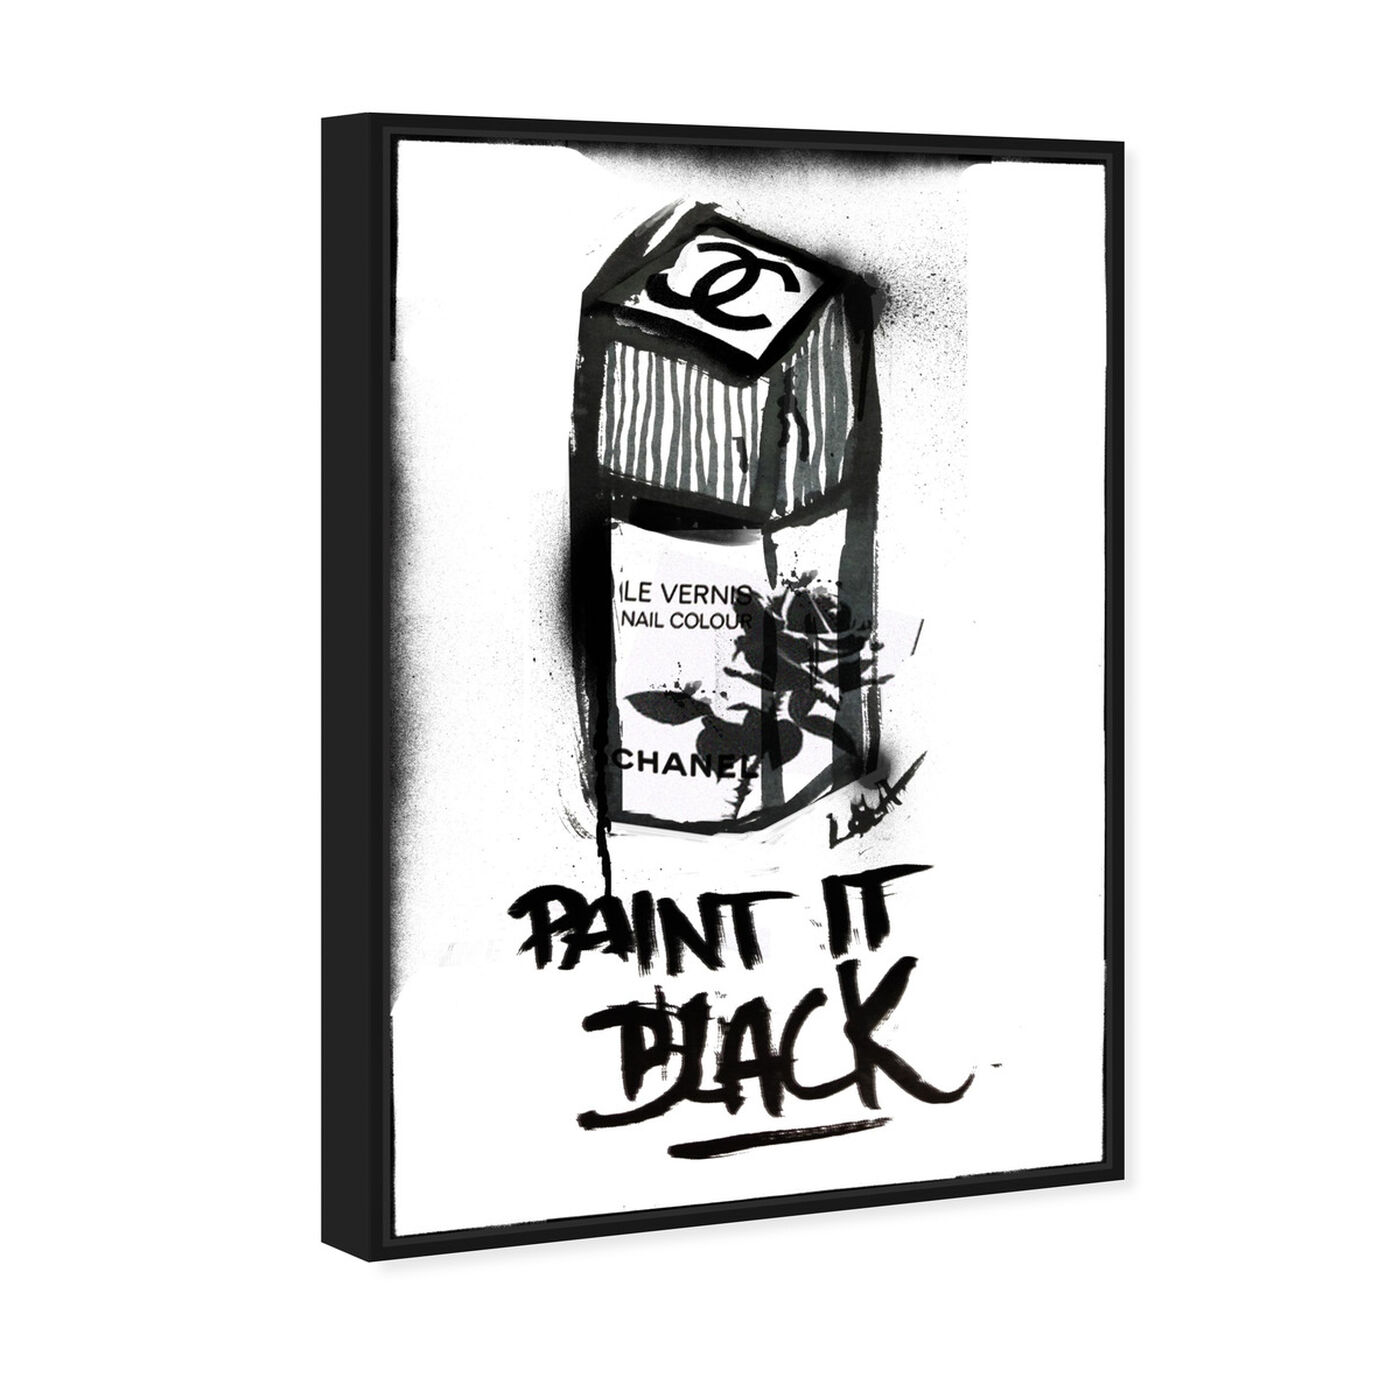 Angled view of Paint it Black featuring fashion and glam and nail polish art.